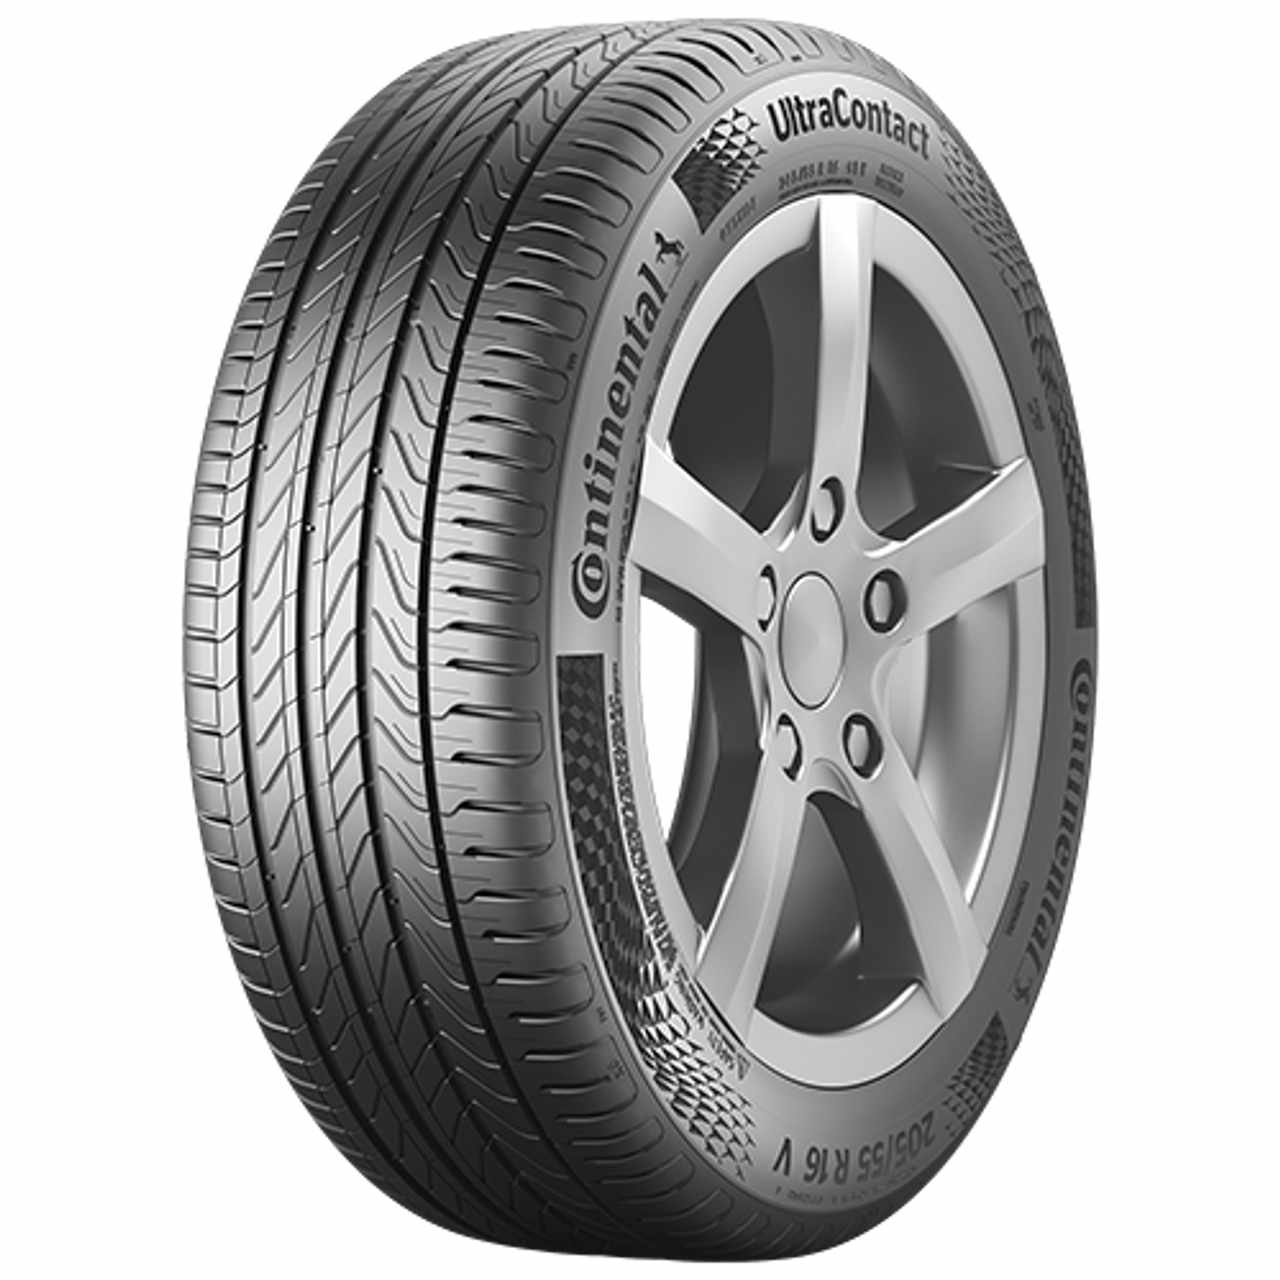 CONTINENTAL ULTRACONTACT (EVc) 235/45R19 99V FR BSW XL